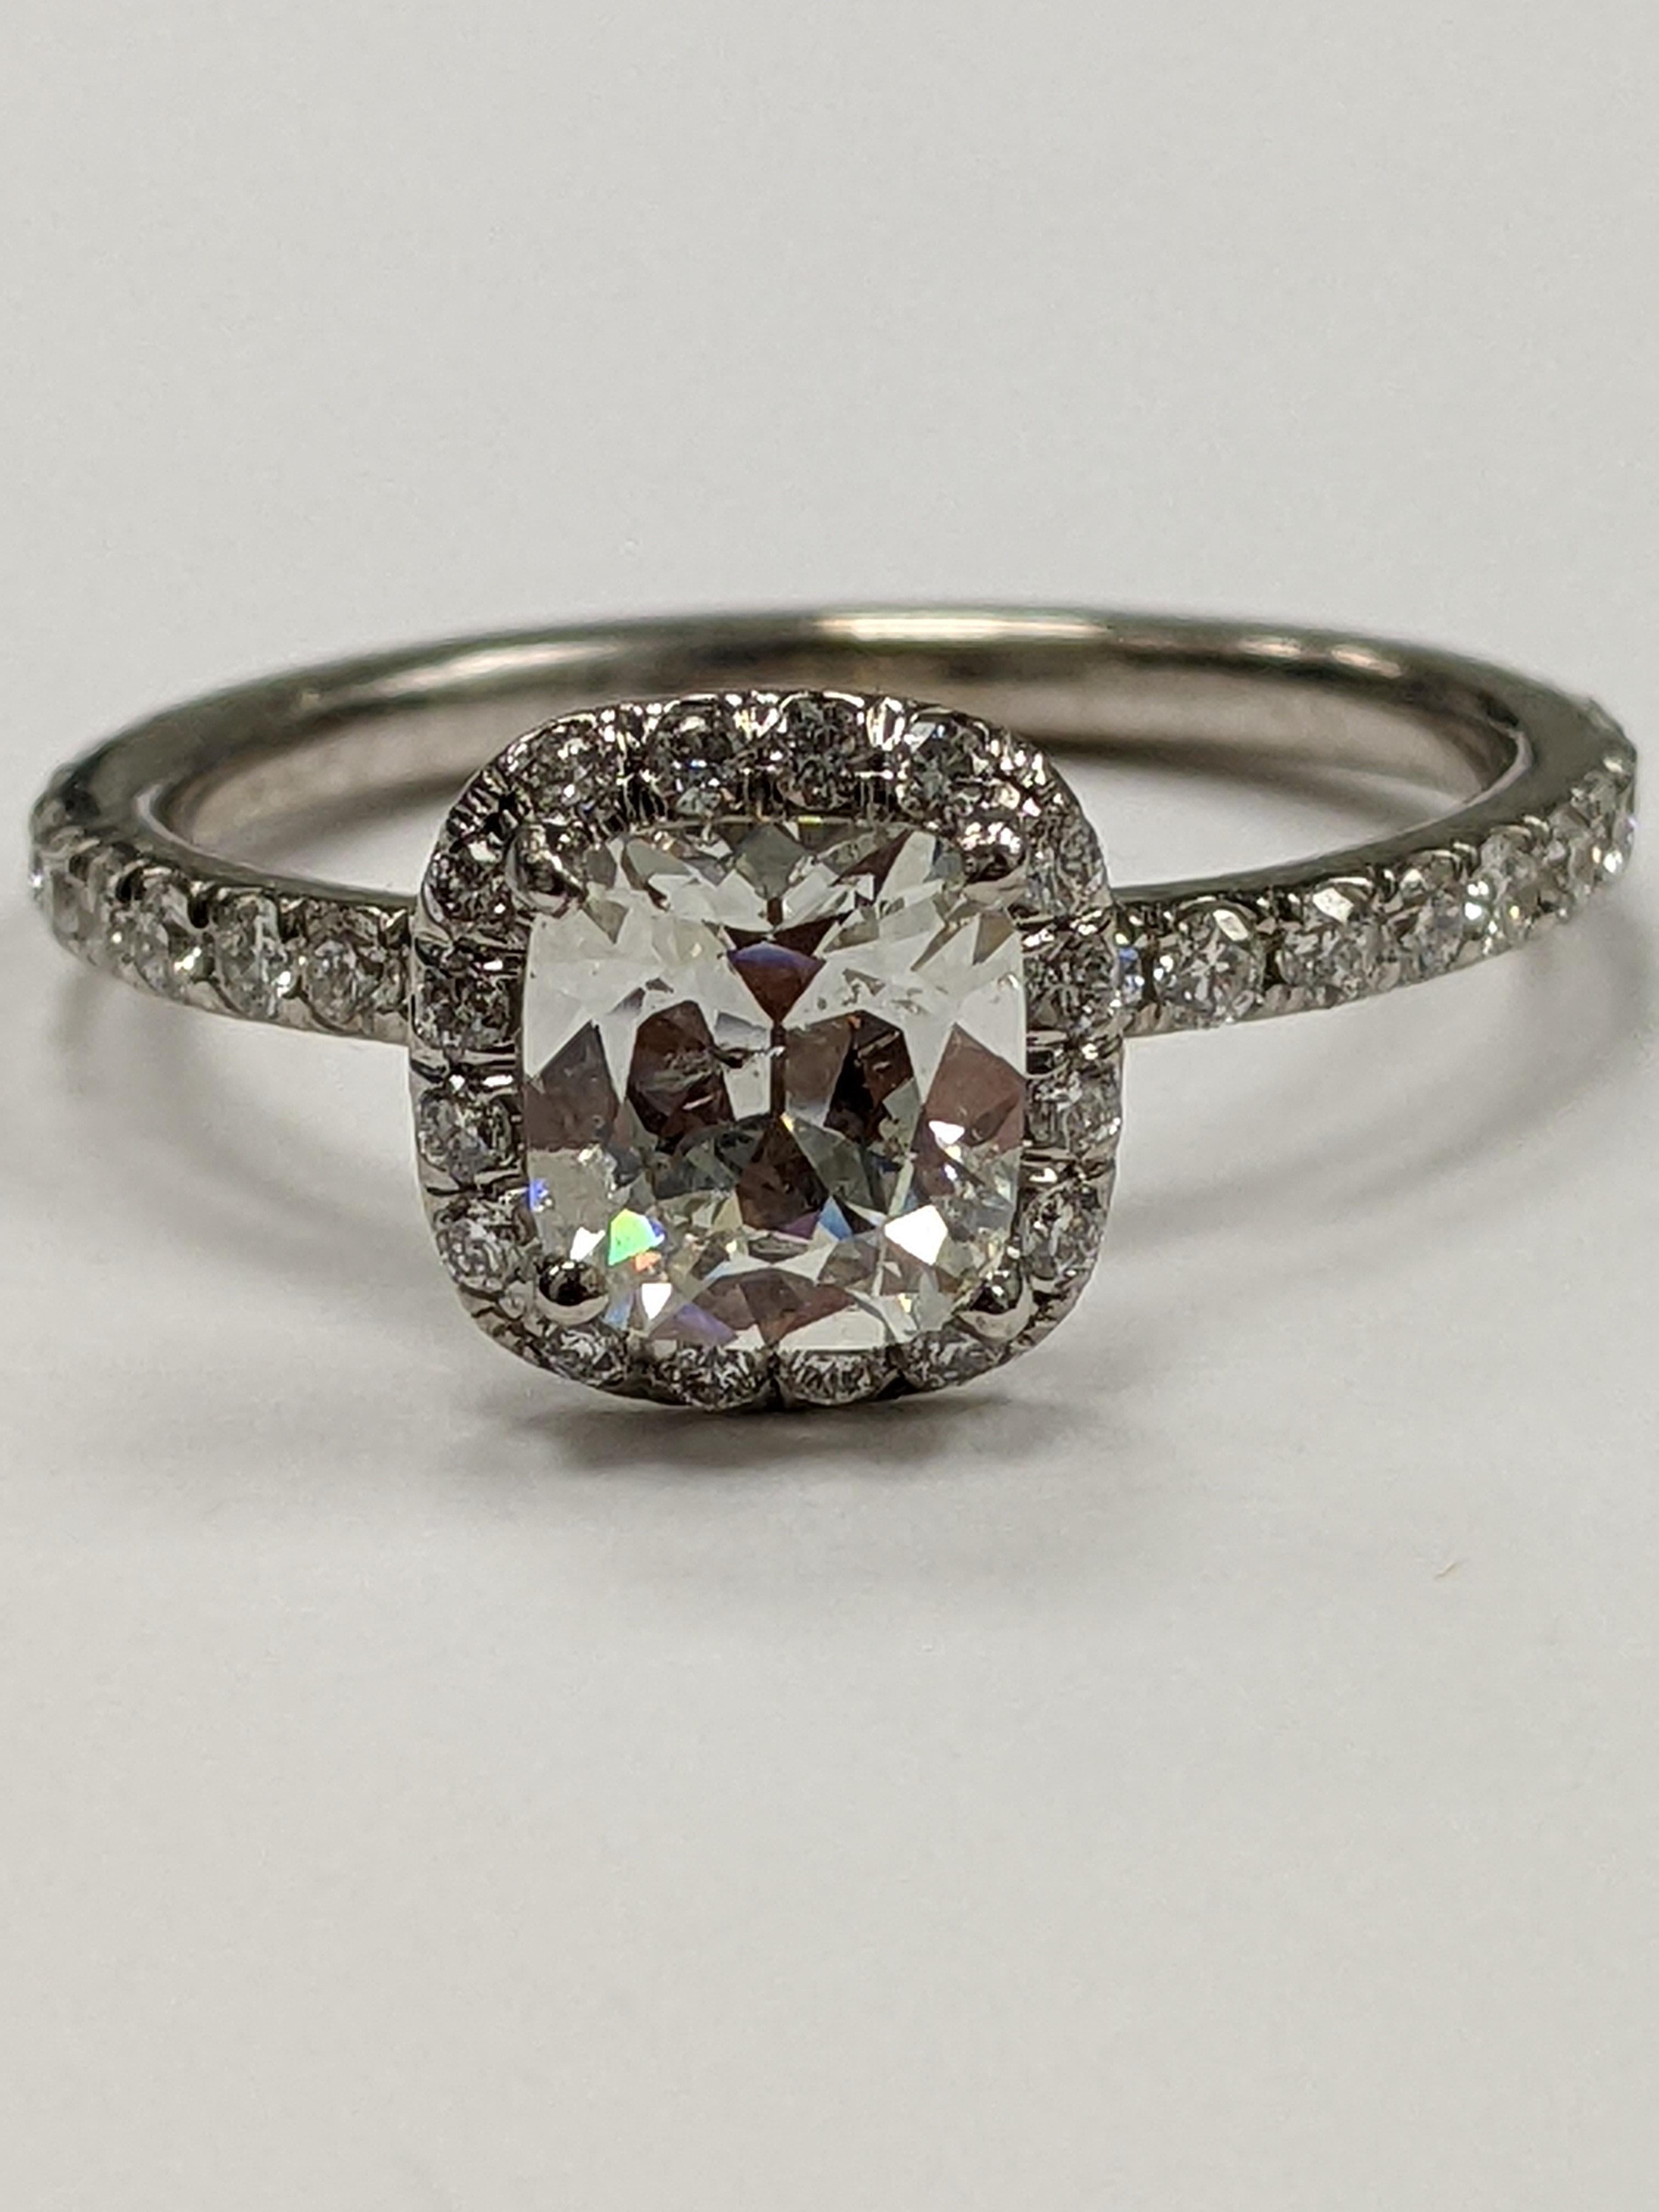 0.82 Cushion in G color SI-2 clarity (AGS certificate upon request) mounted in a simply elegant ring.  The mounting is made out of 18KT white gold, and the center stone is surrounded by a halo of small diamonds that extends into the shank as well